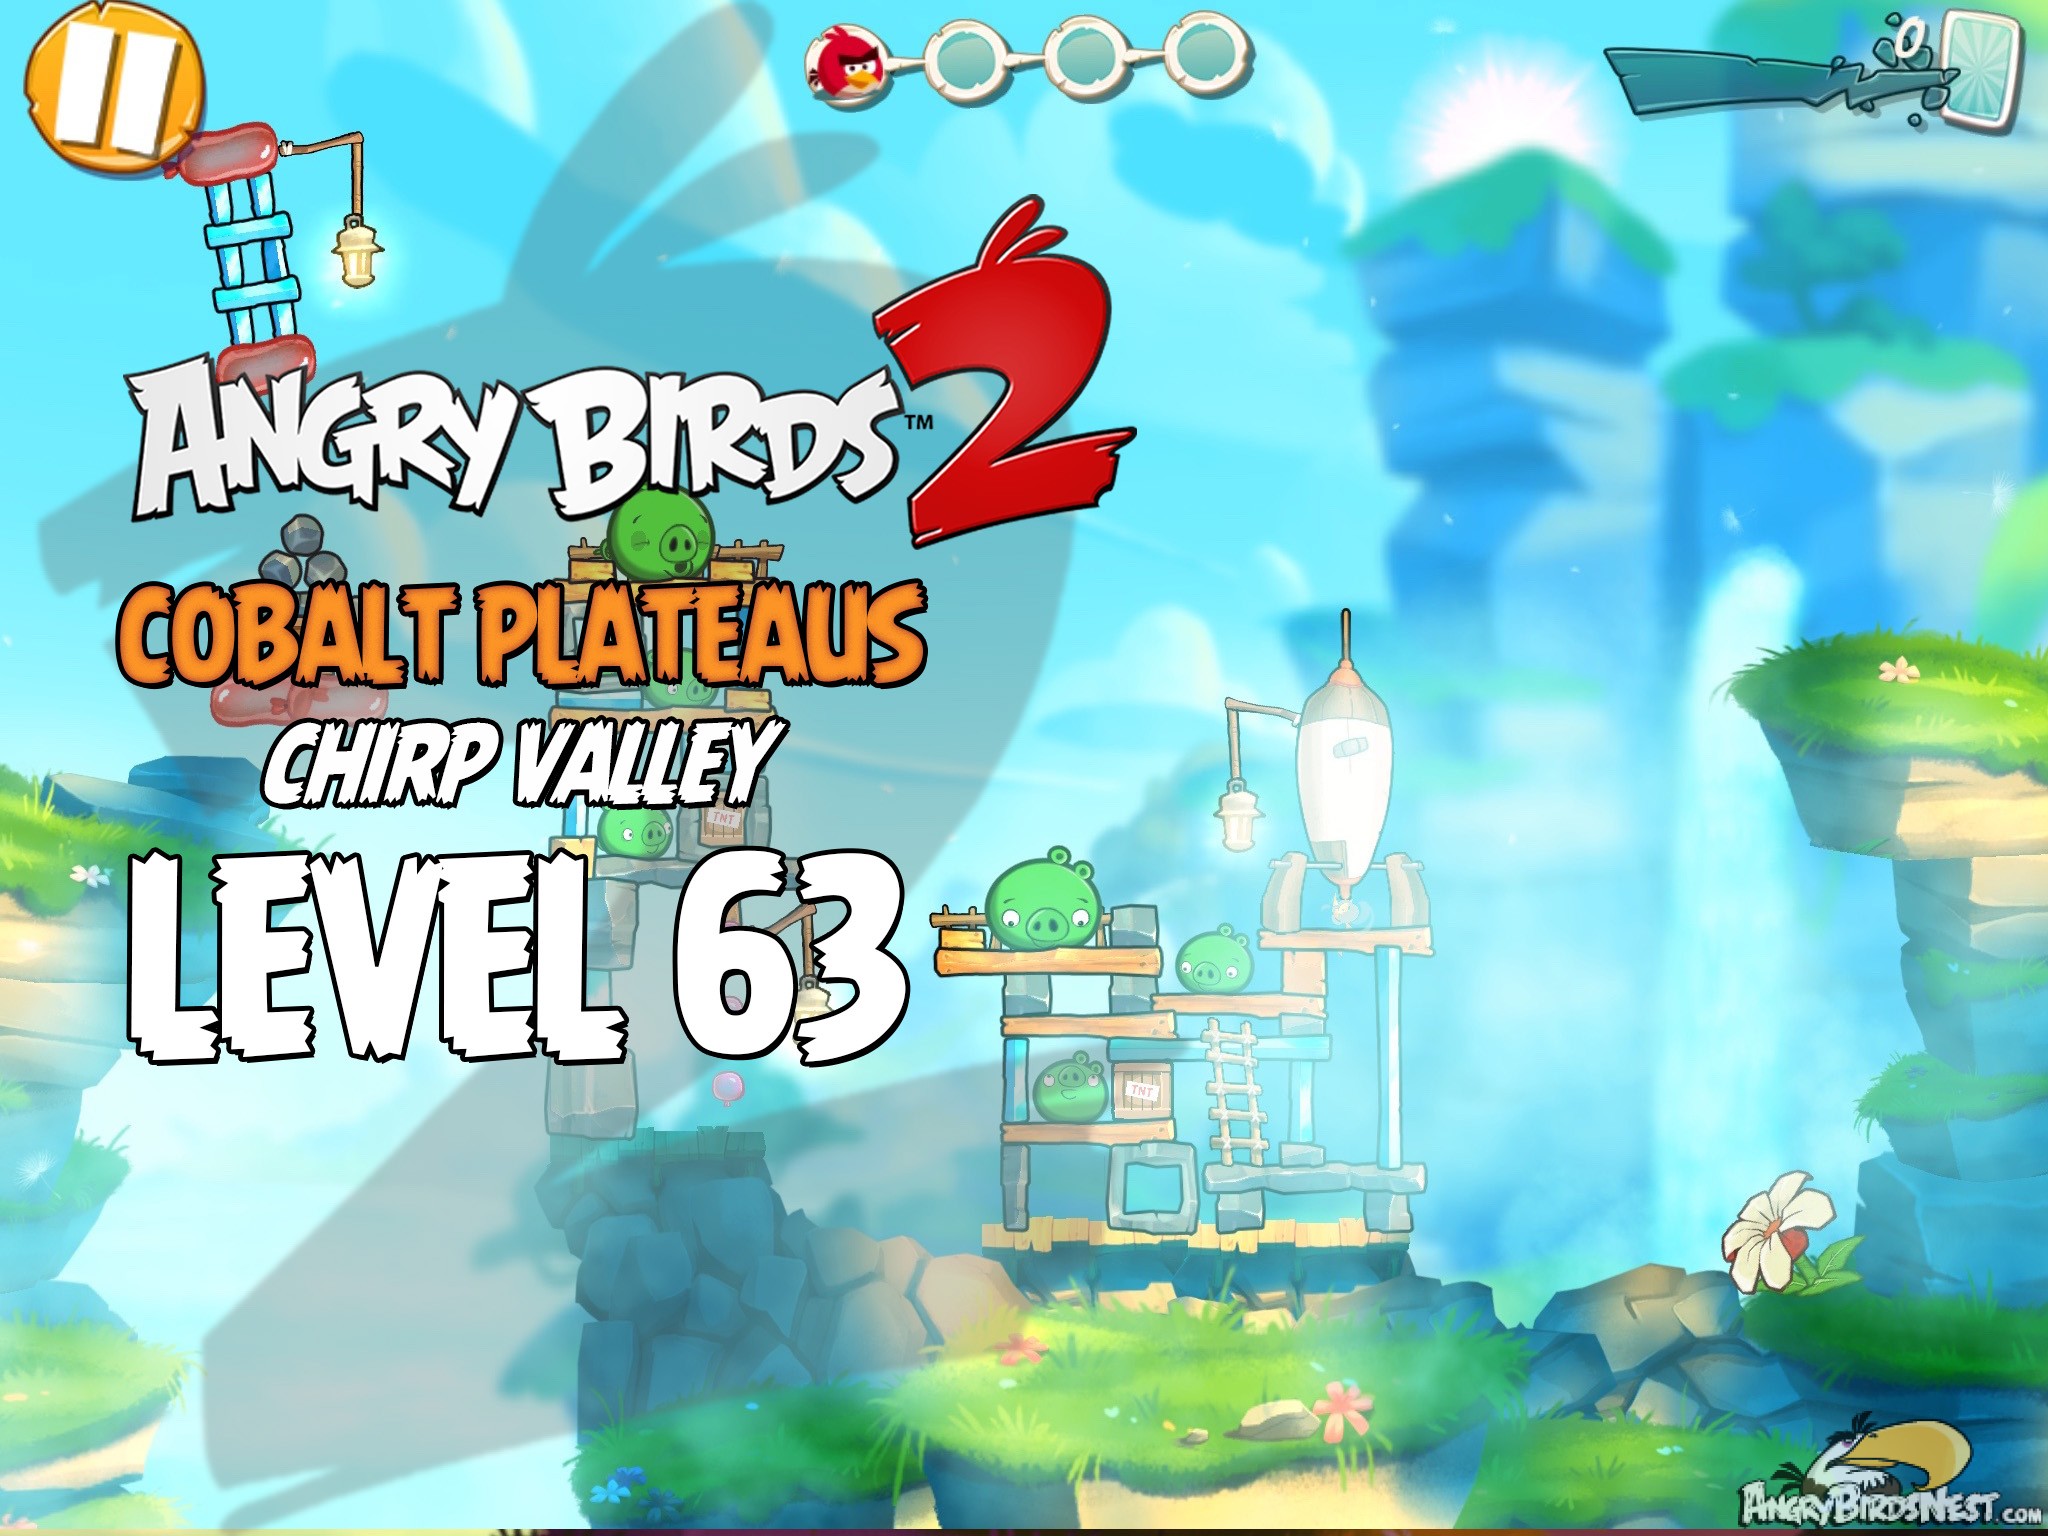 Angry Birds 2 Cobalt Plateaus Chirp Valley Level 63